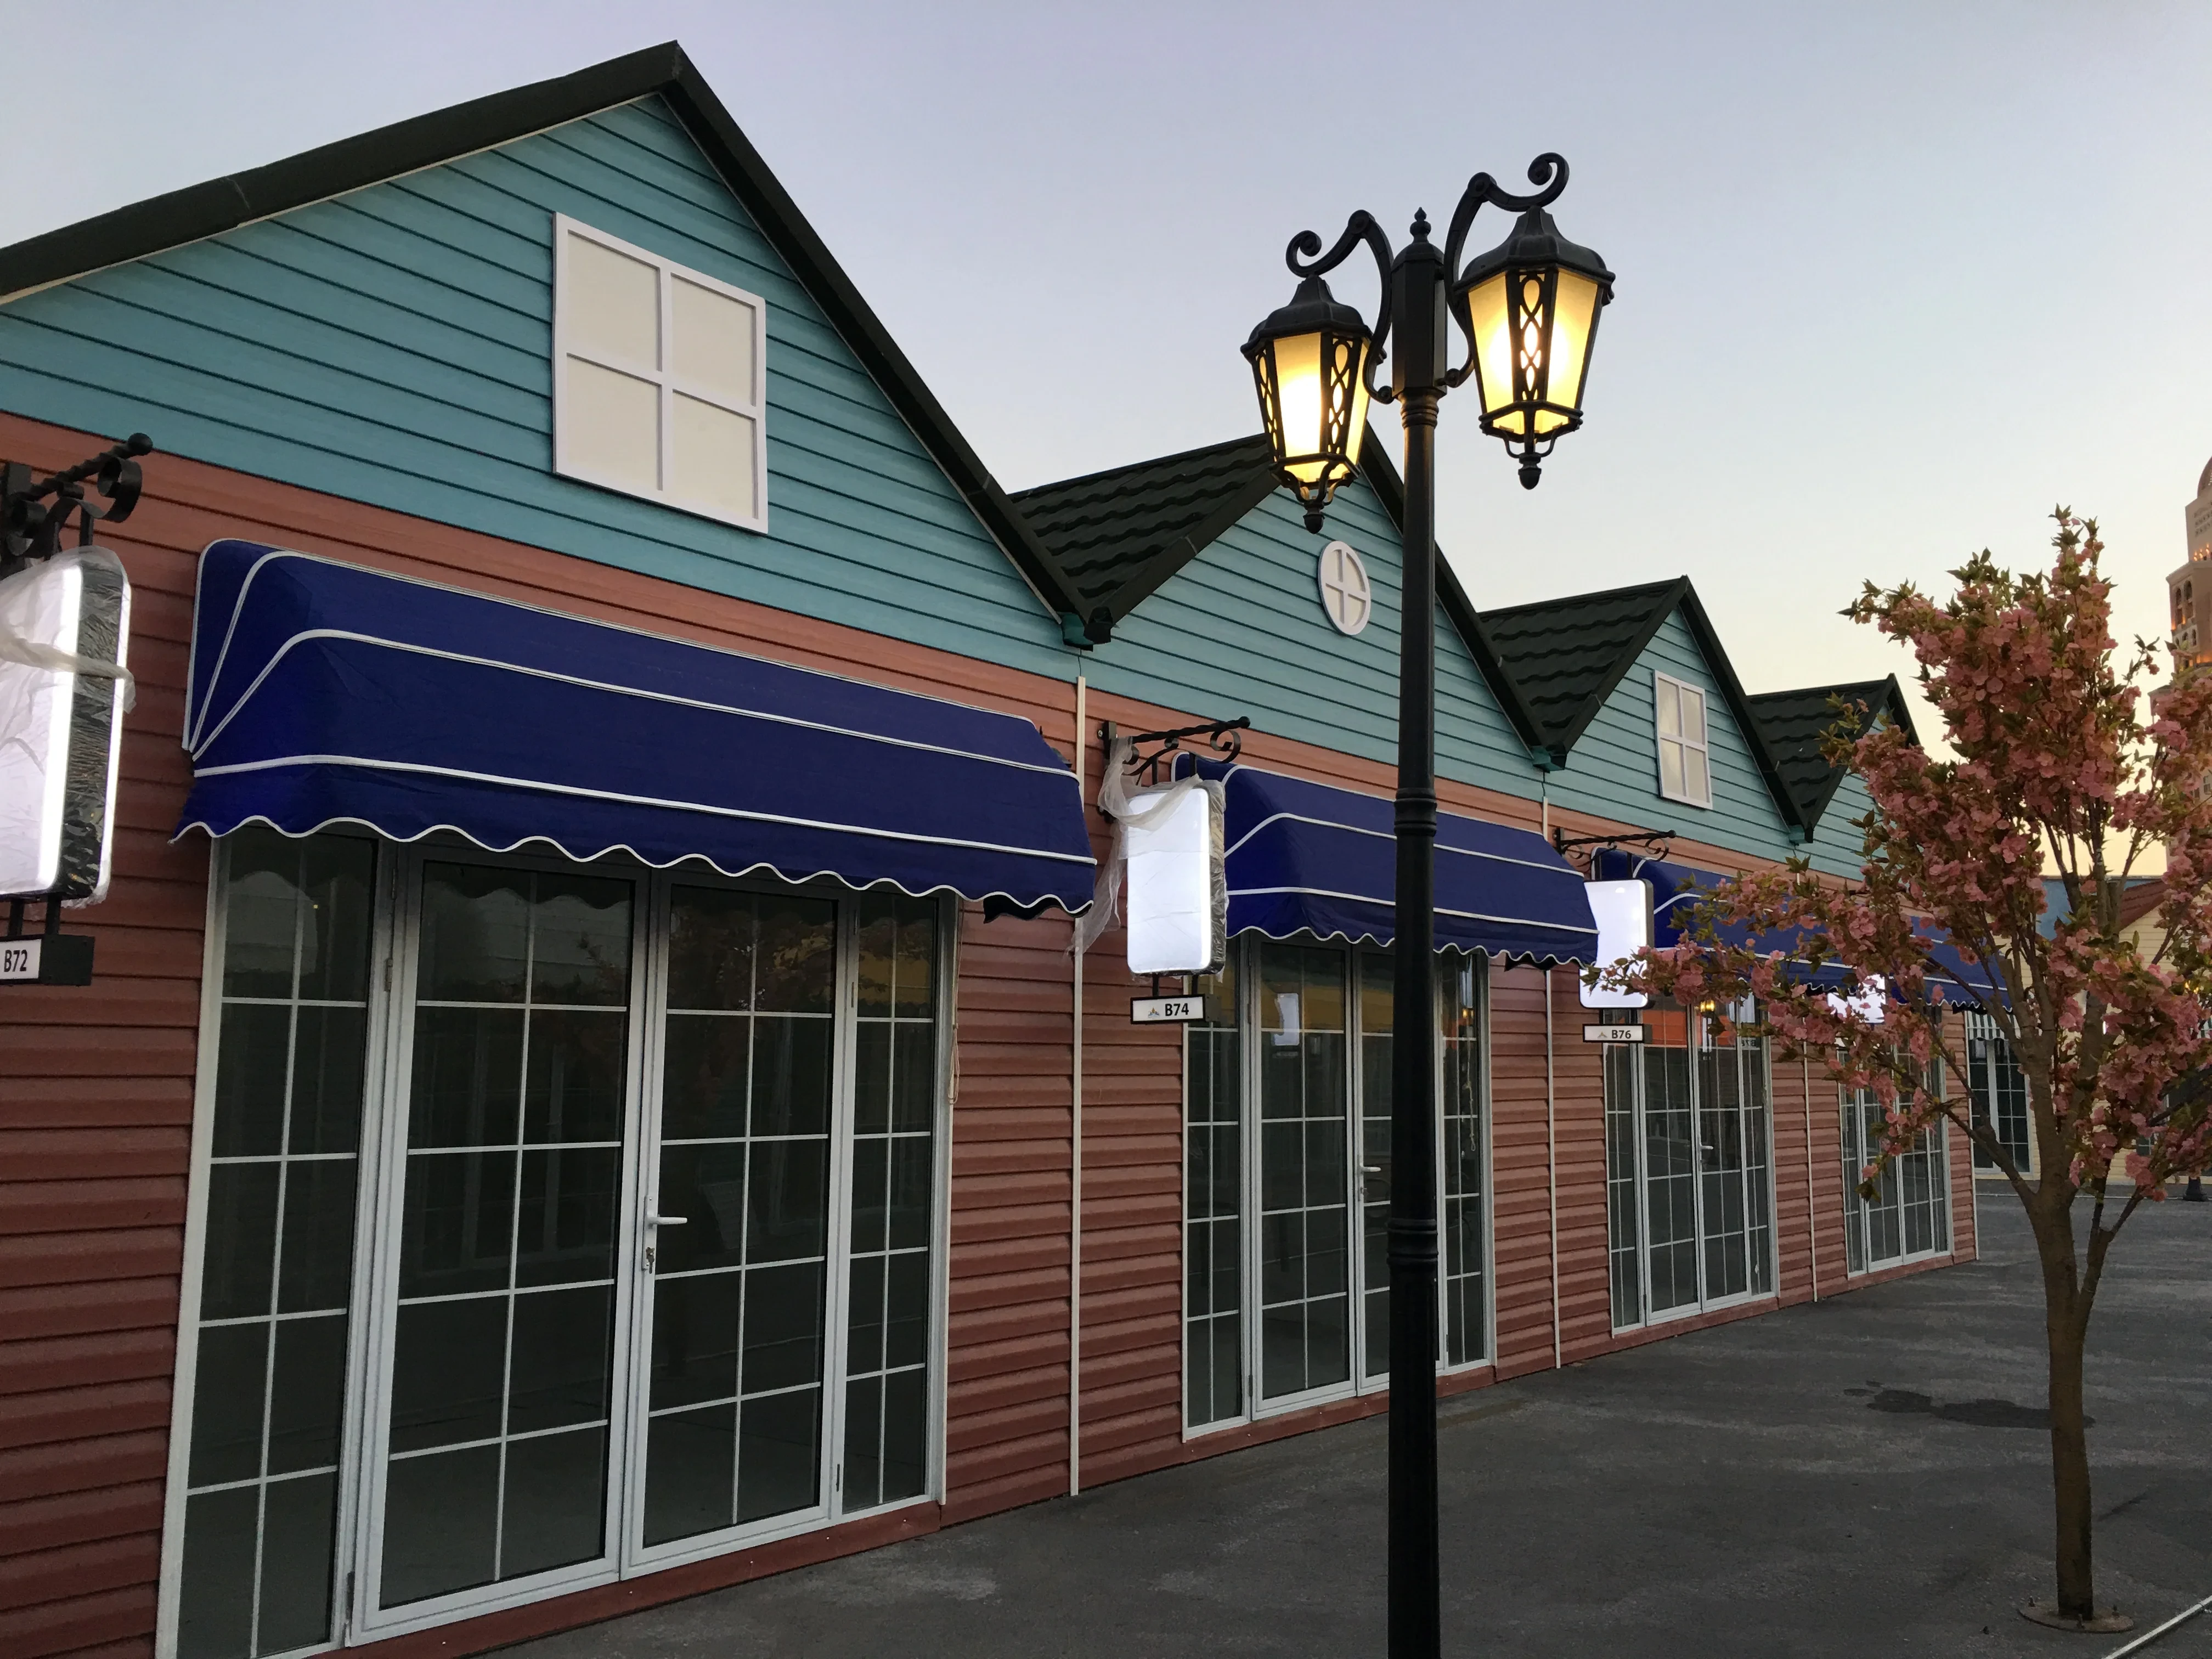 Customizing the Retail Experience with Prefab Shops in Shopping Villages